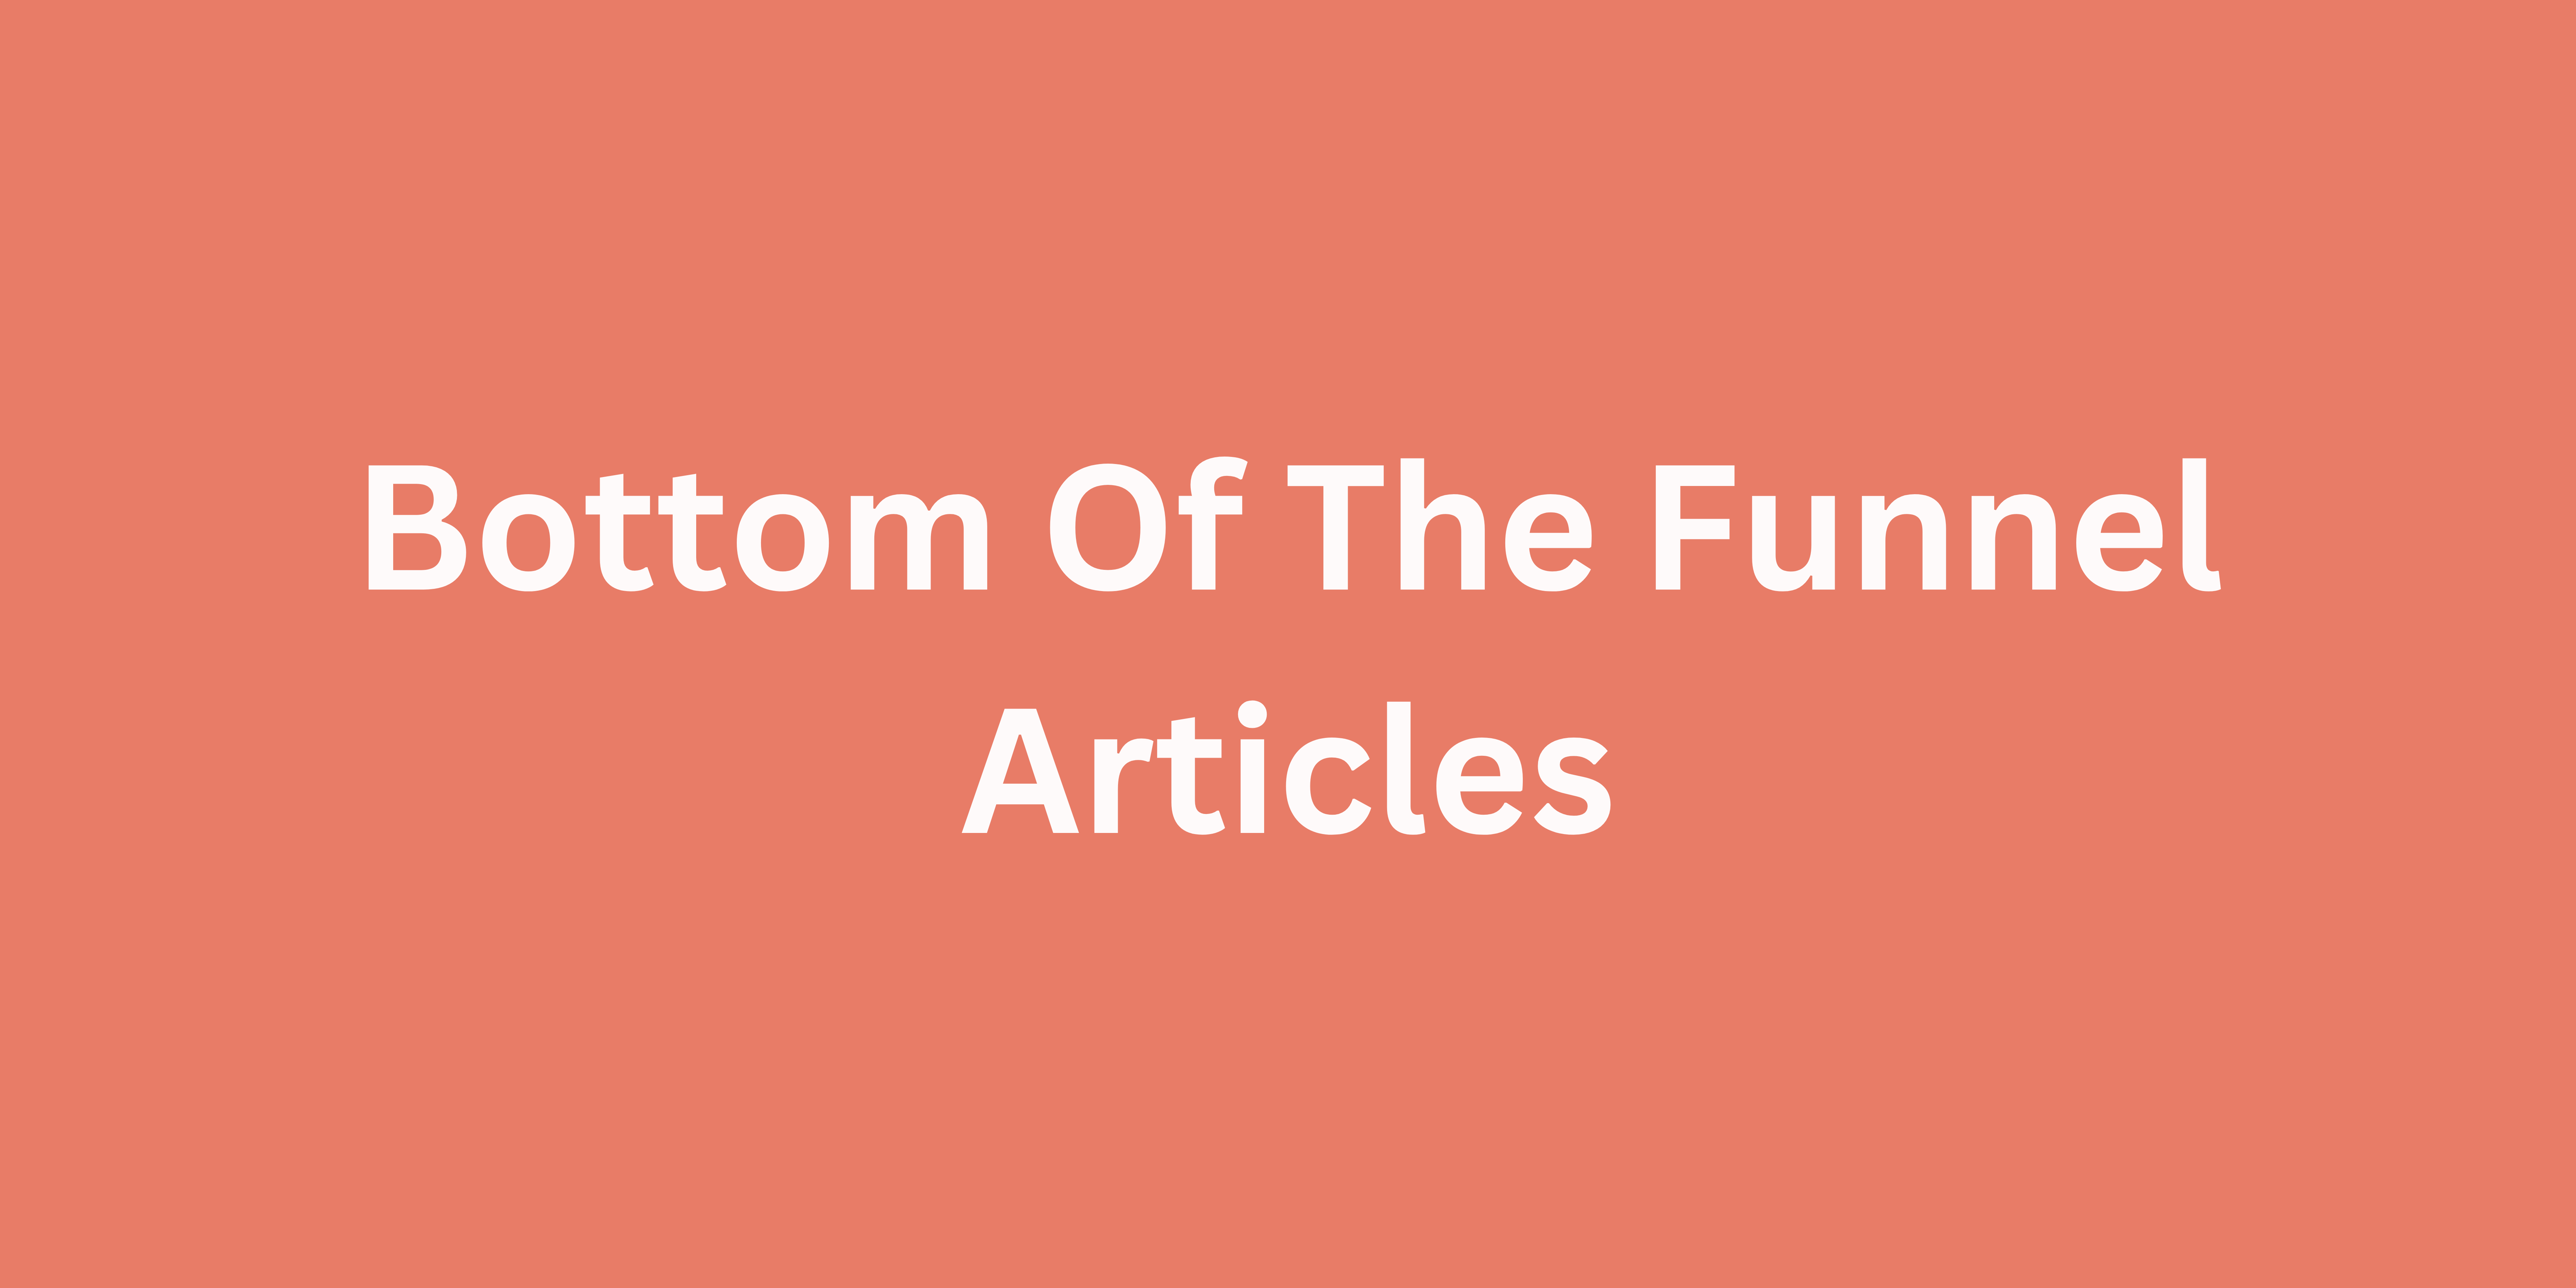 How To Write Bottom Of the Funnel(BoFu) Article for SaaS(Case Study)